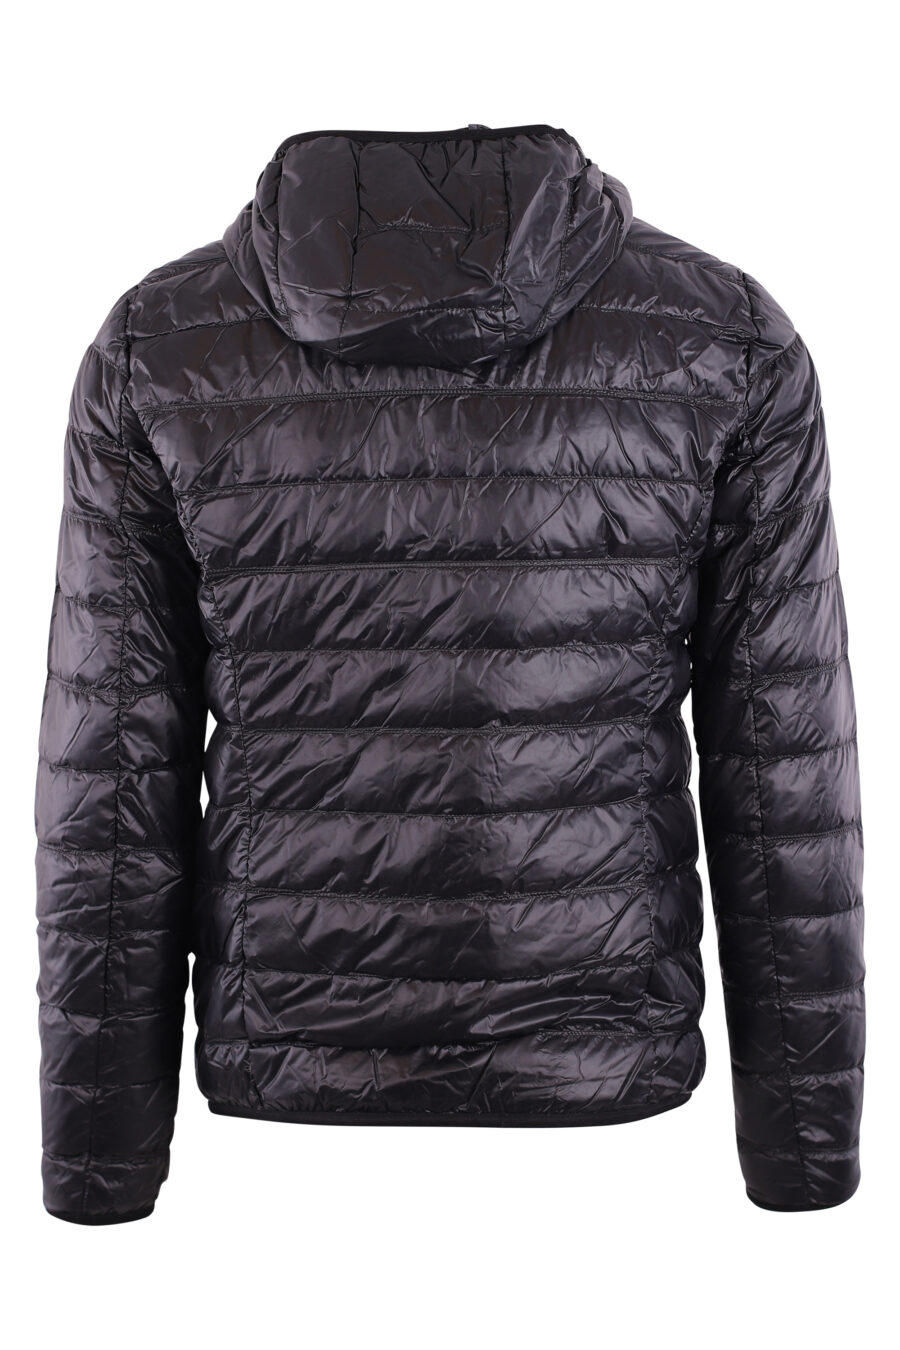 Black quilted hooded jacket with "lux identity" logo - IMG 3146